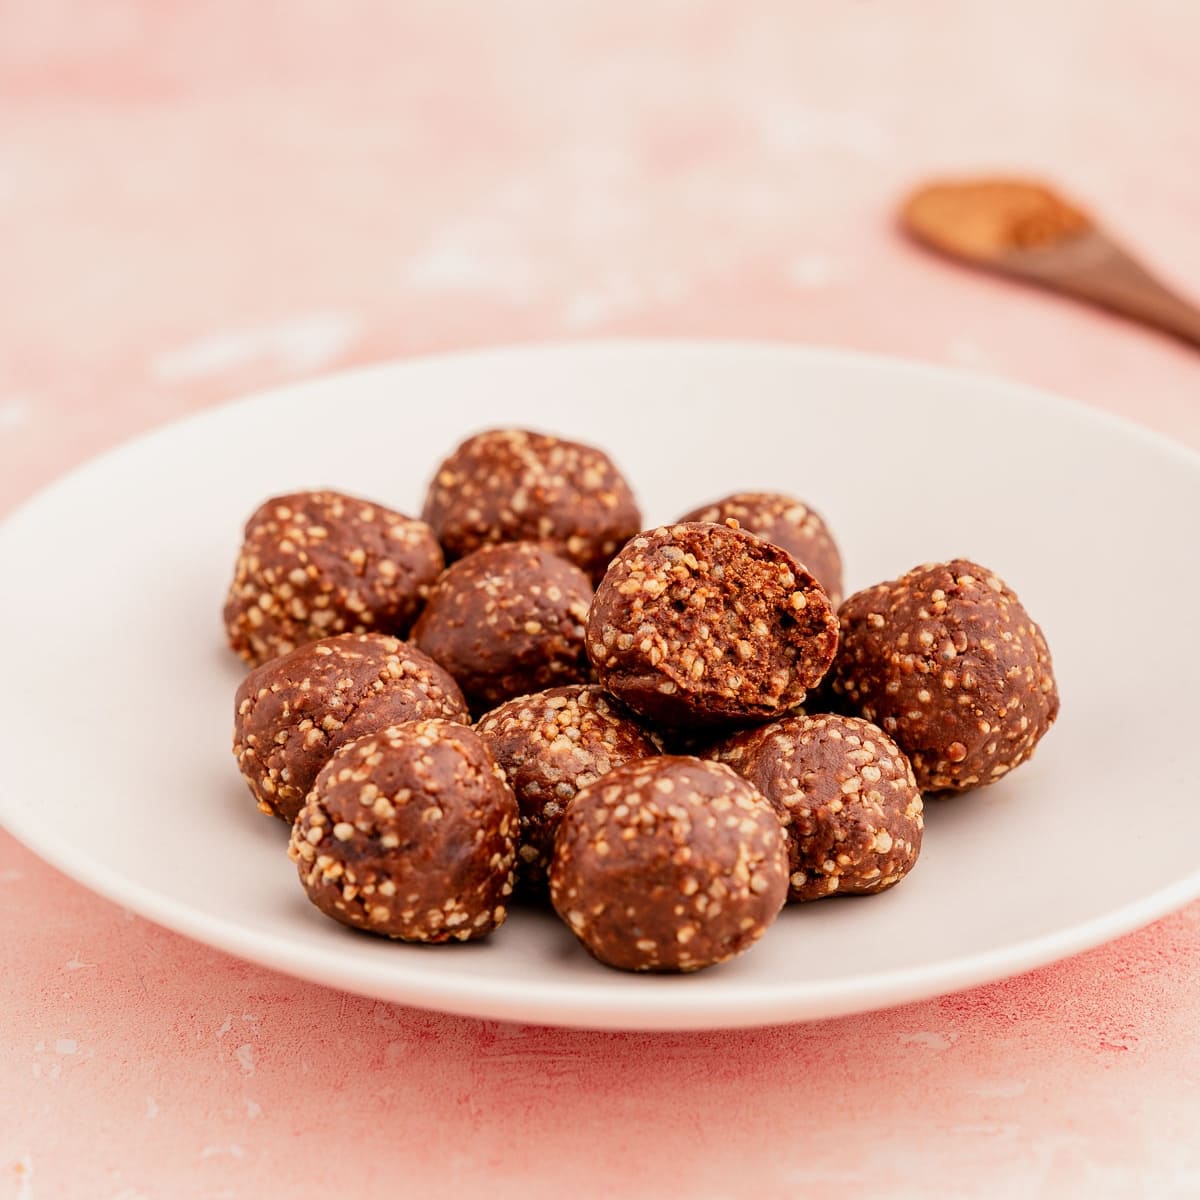 A white plate containing several brown, round quinoa crunch bites on a pink surface, with a wooden spoon in the background.